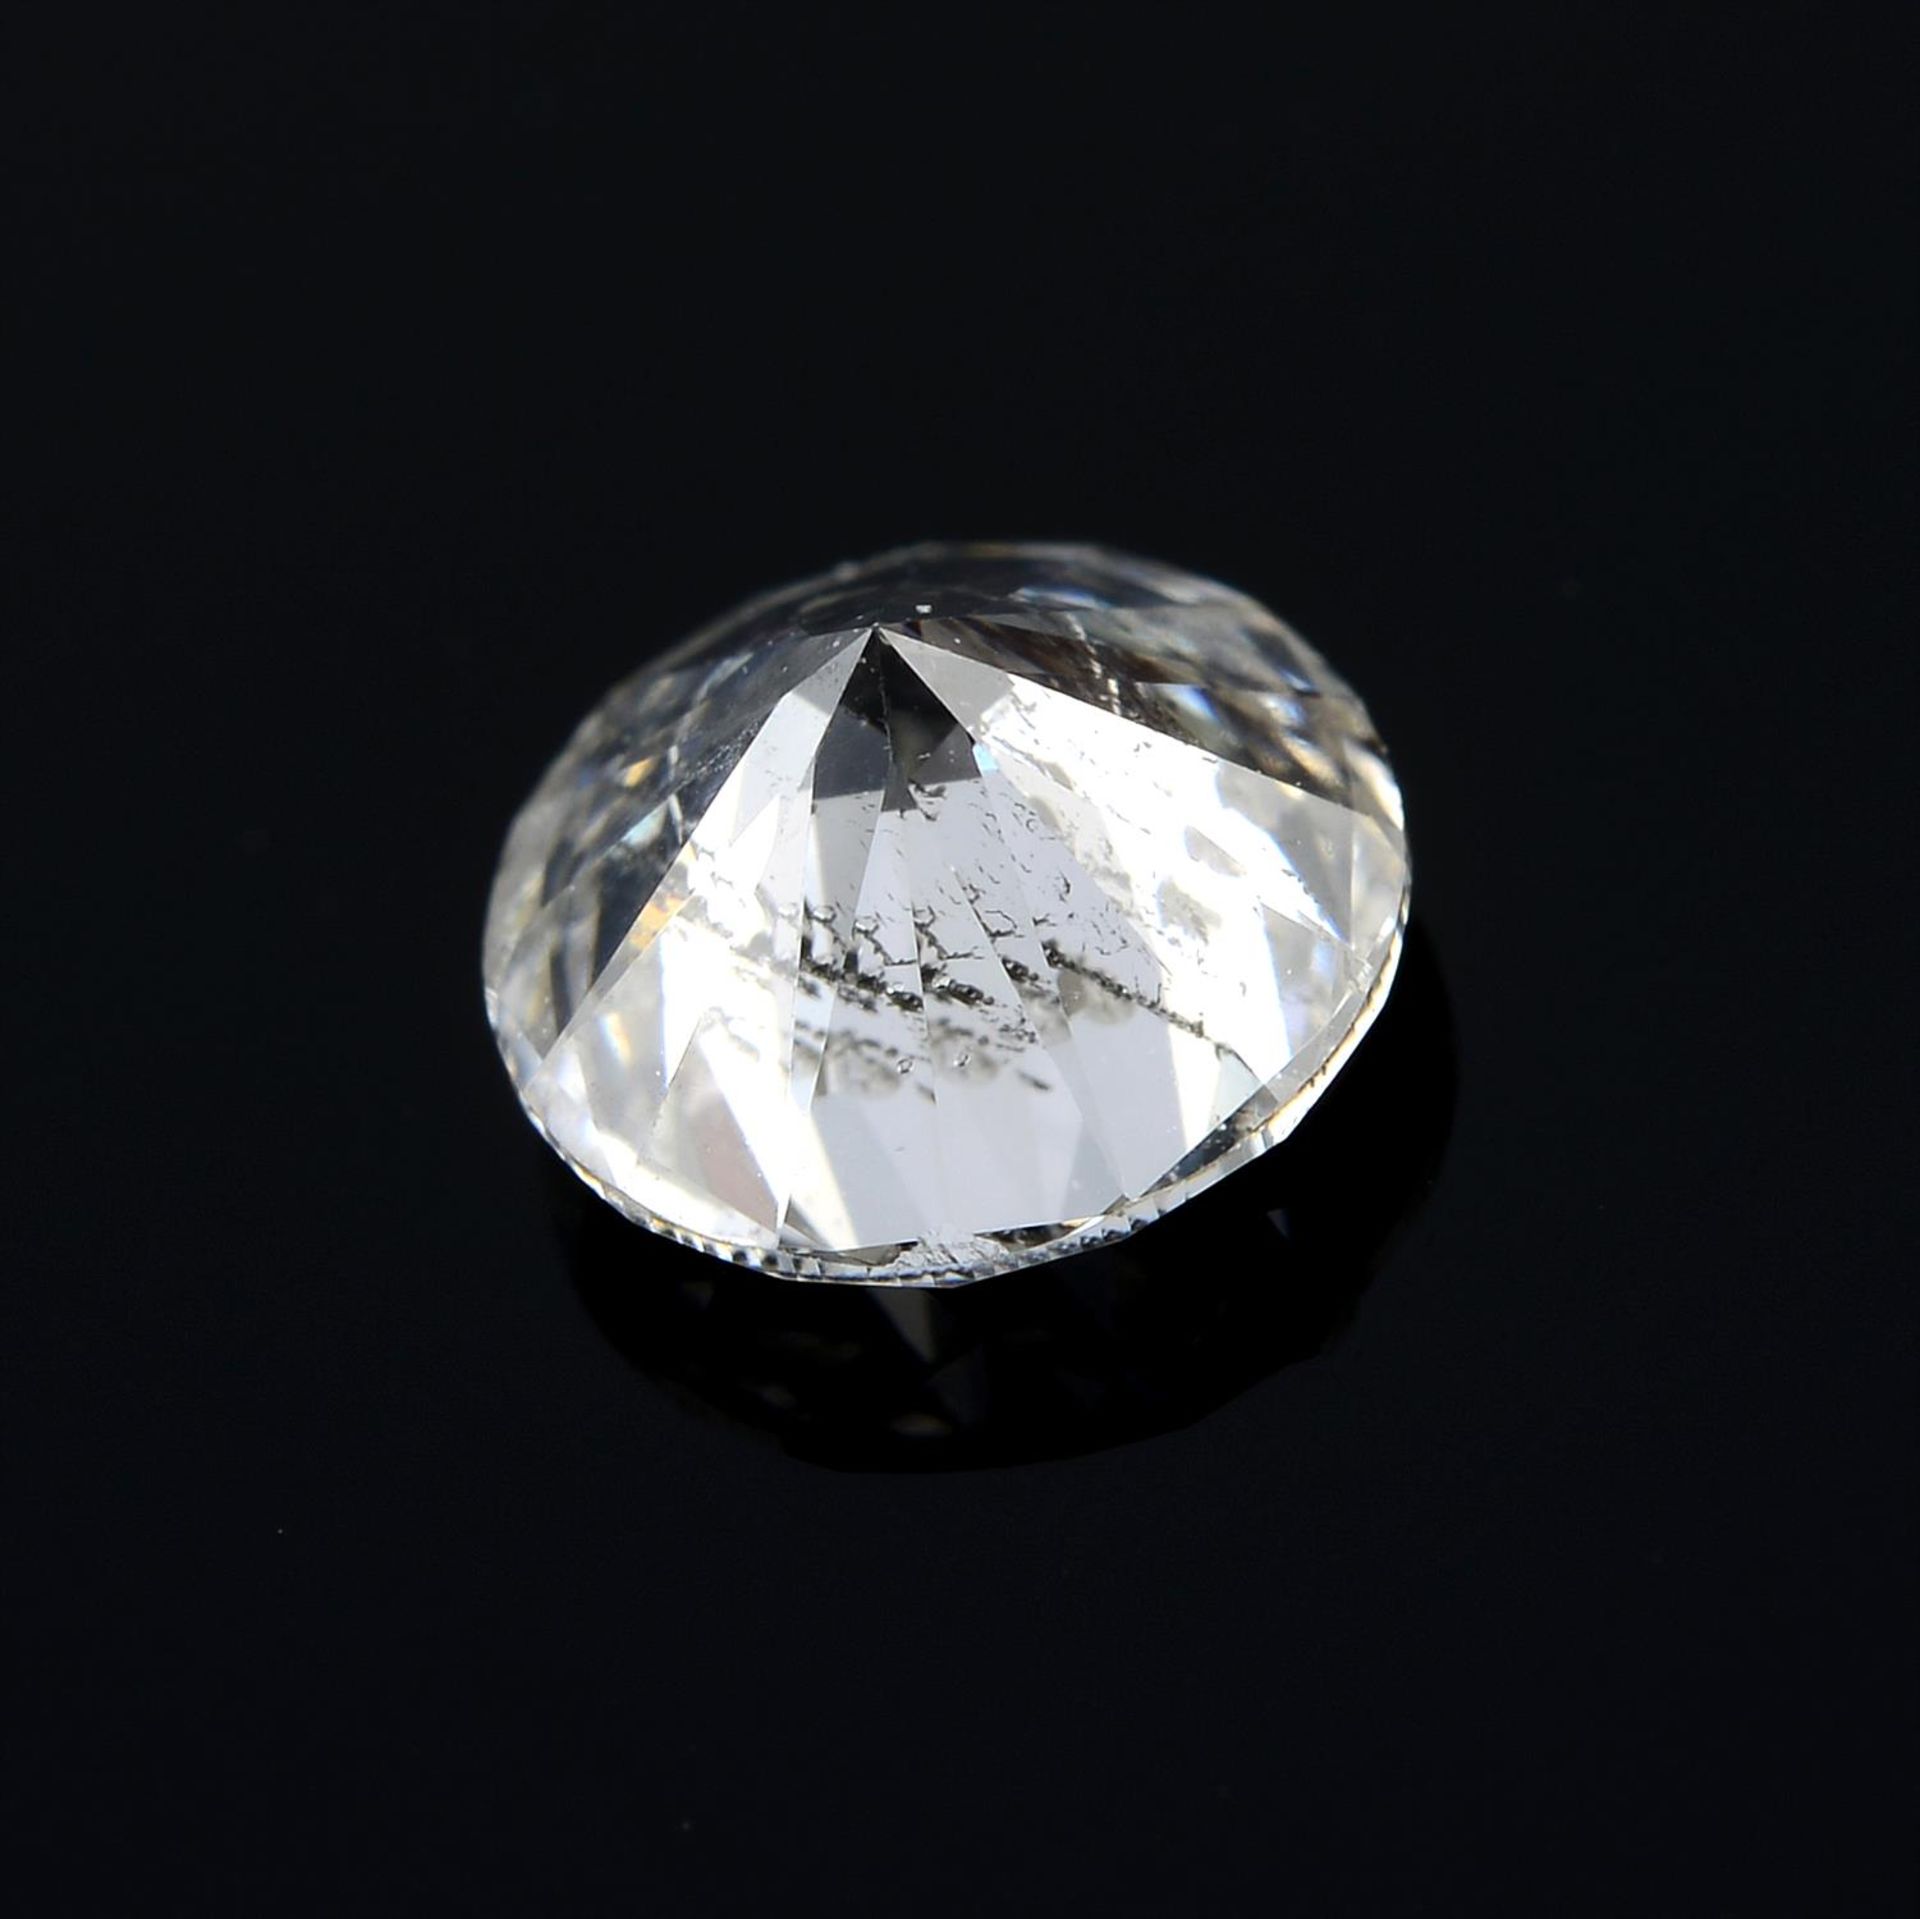 A round brilliant-cut diamond, weight 0.62ct. - Image 2 of 2